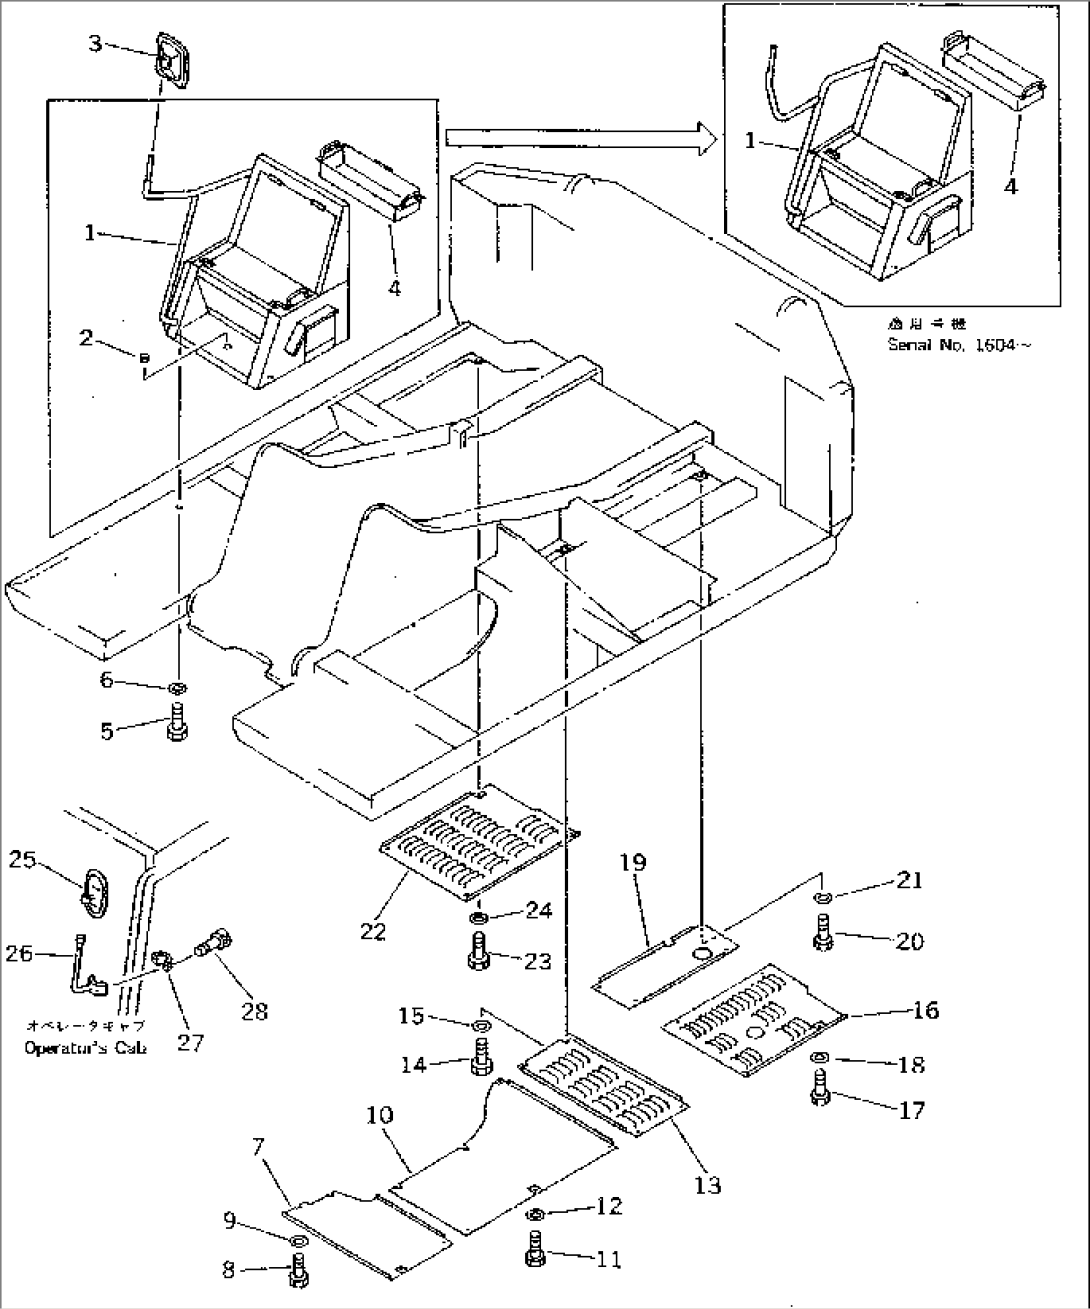 MACHINERY COMPARTMENT (3/3)(#1601-1861)